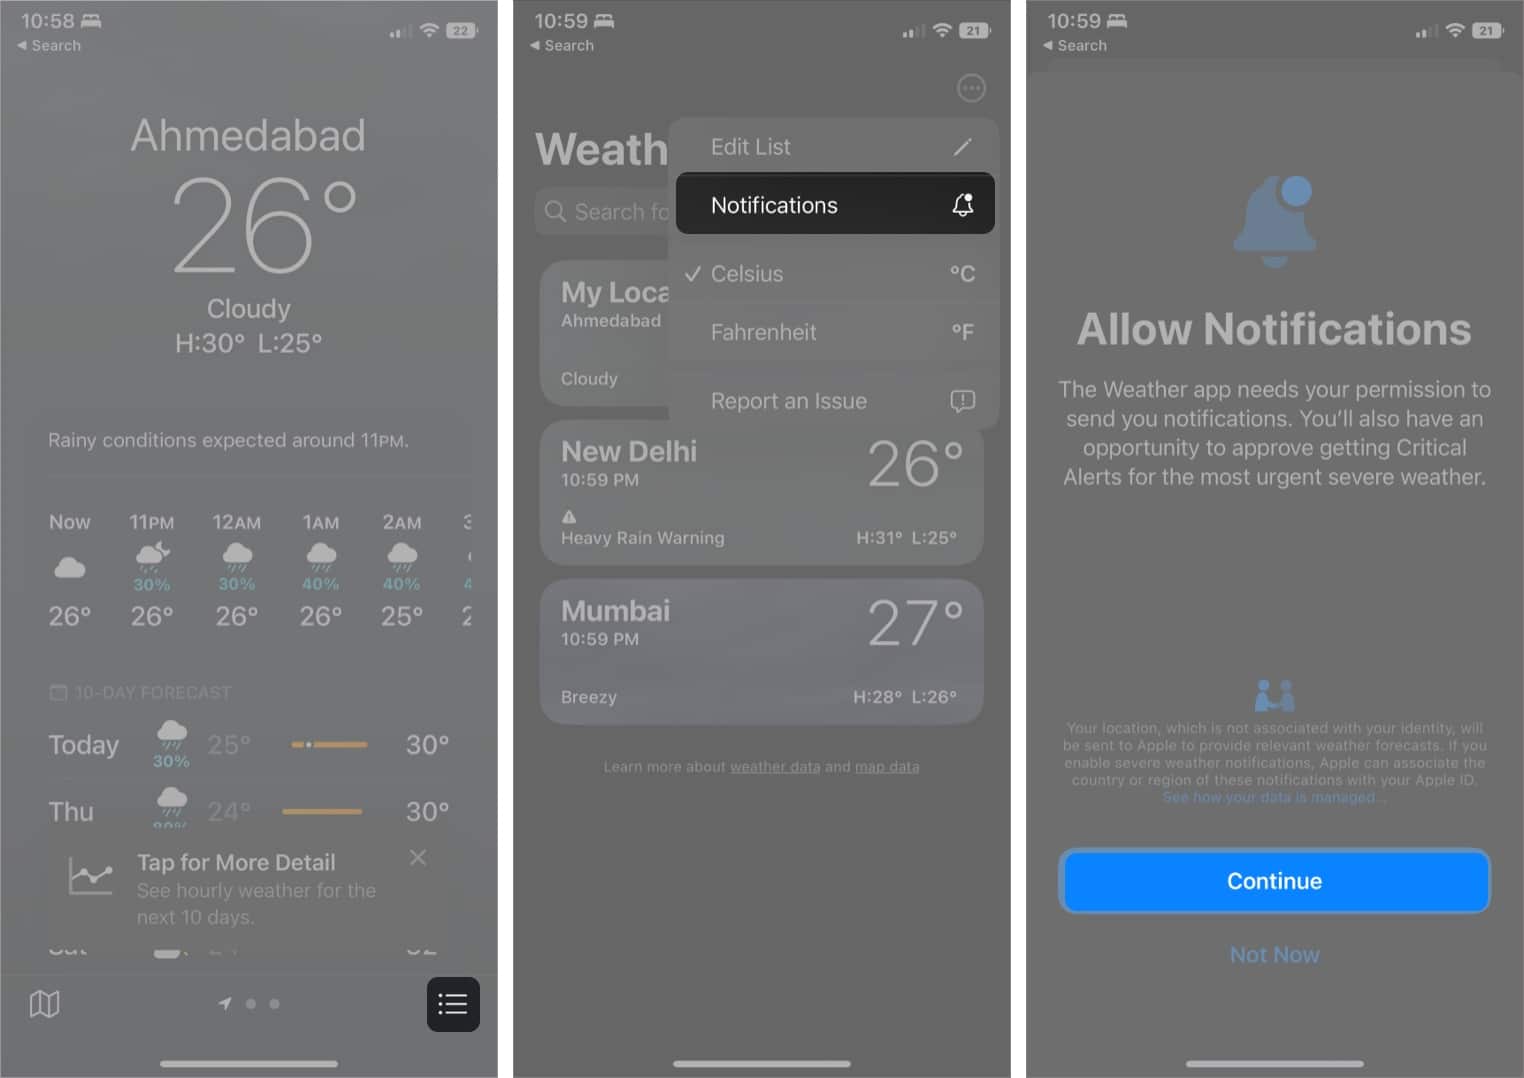 Setting up your location in the weather app